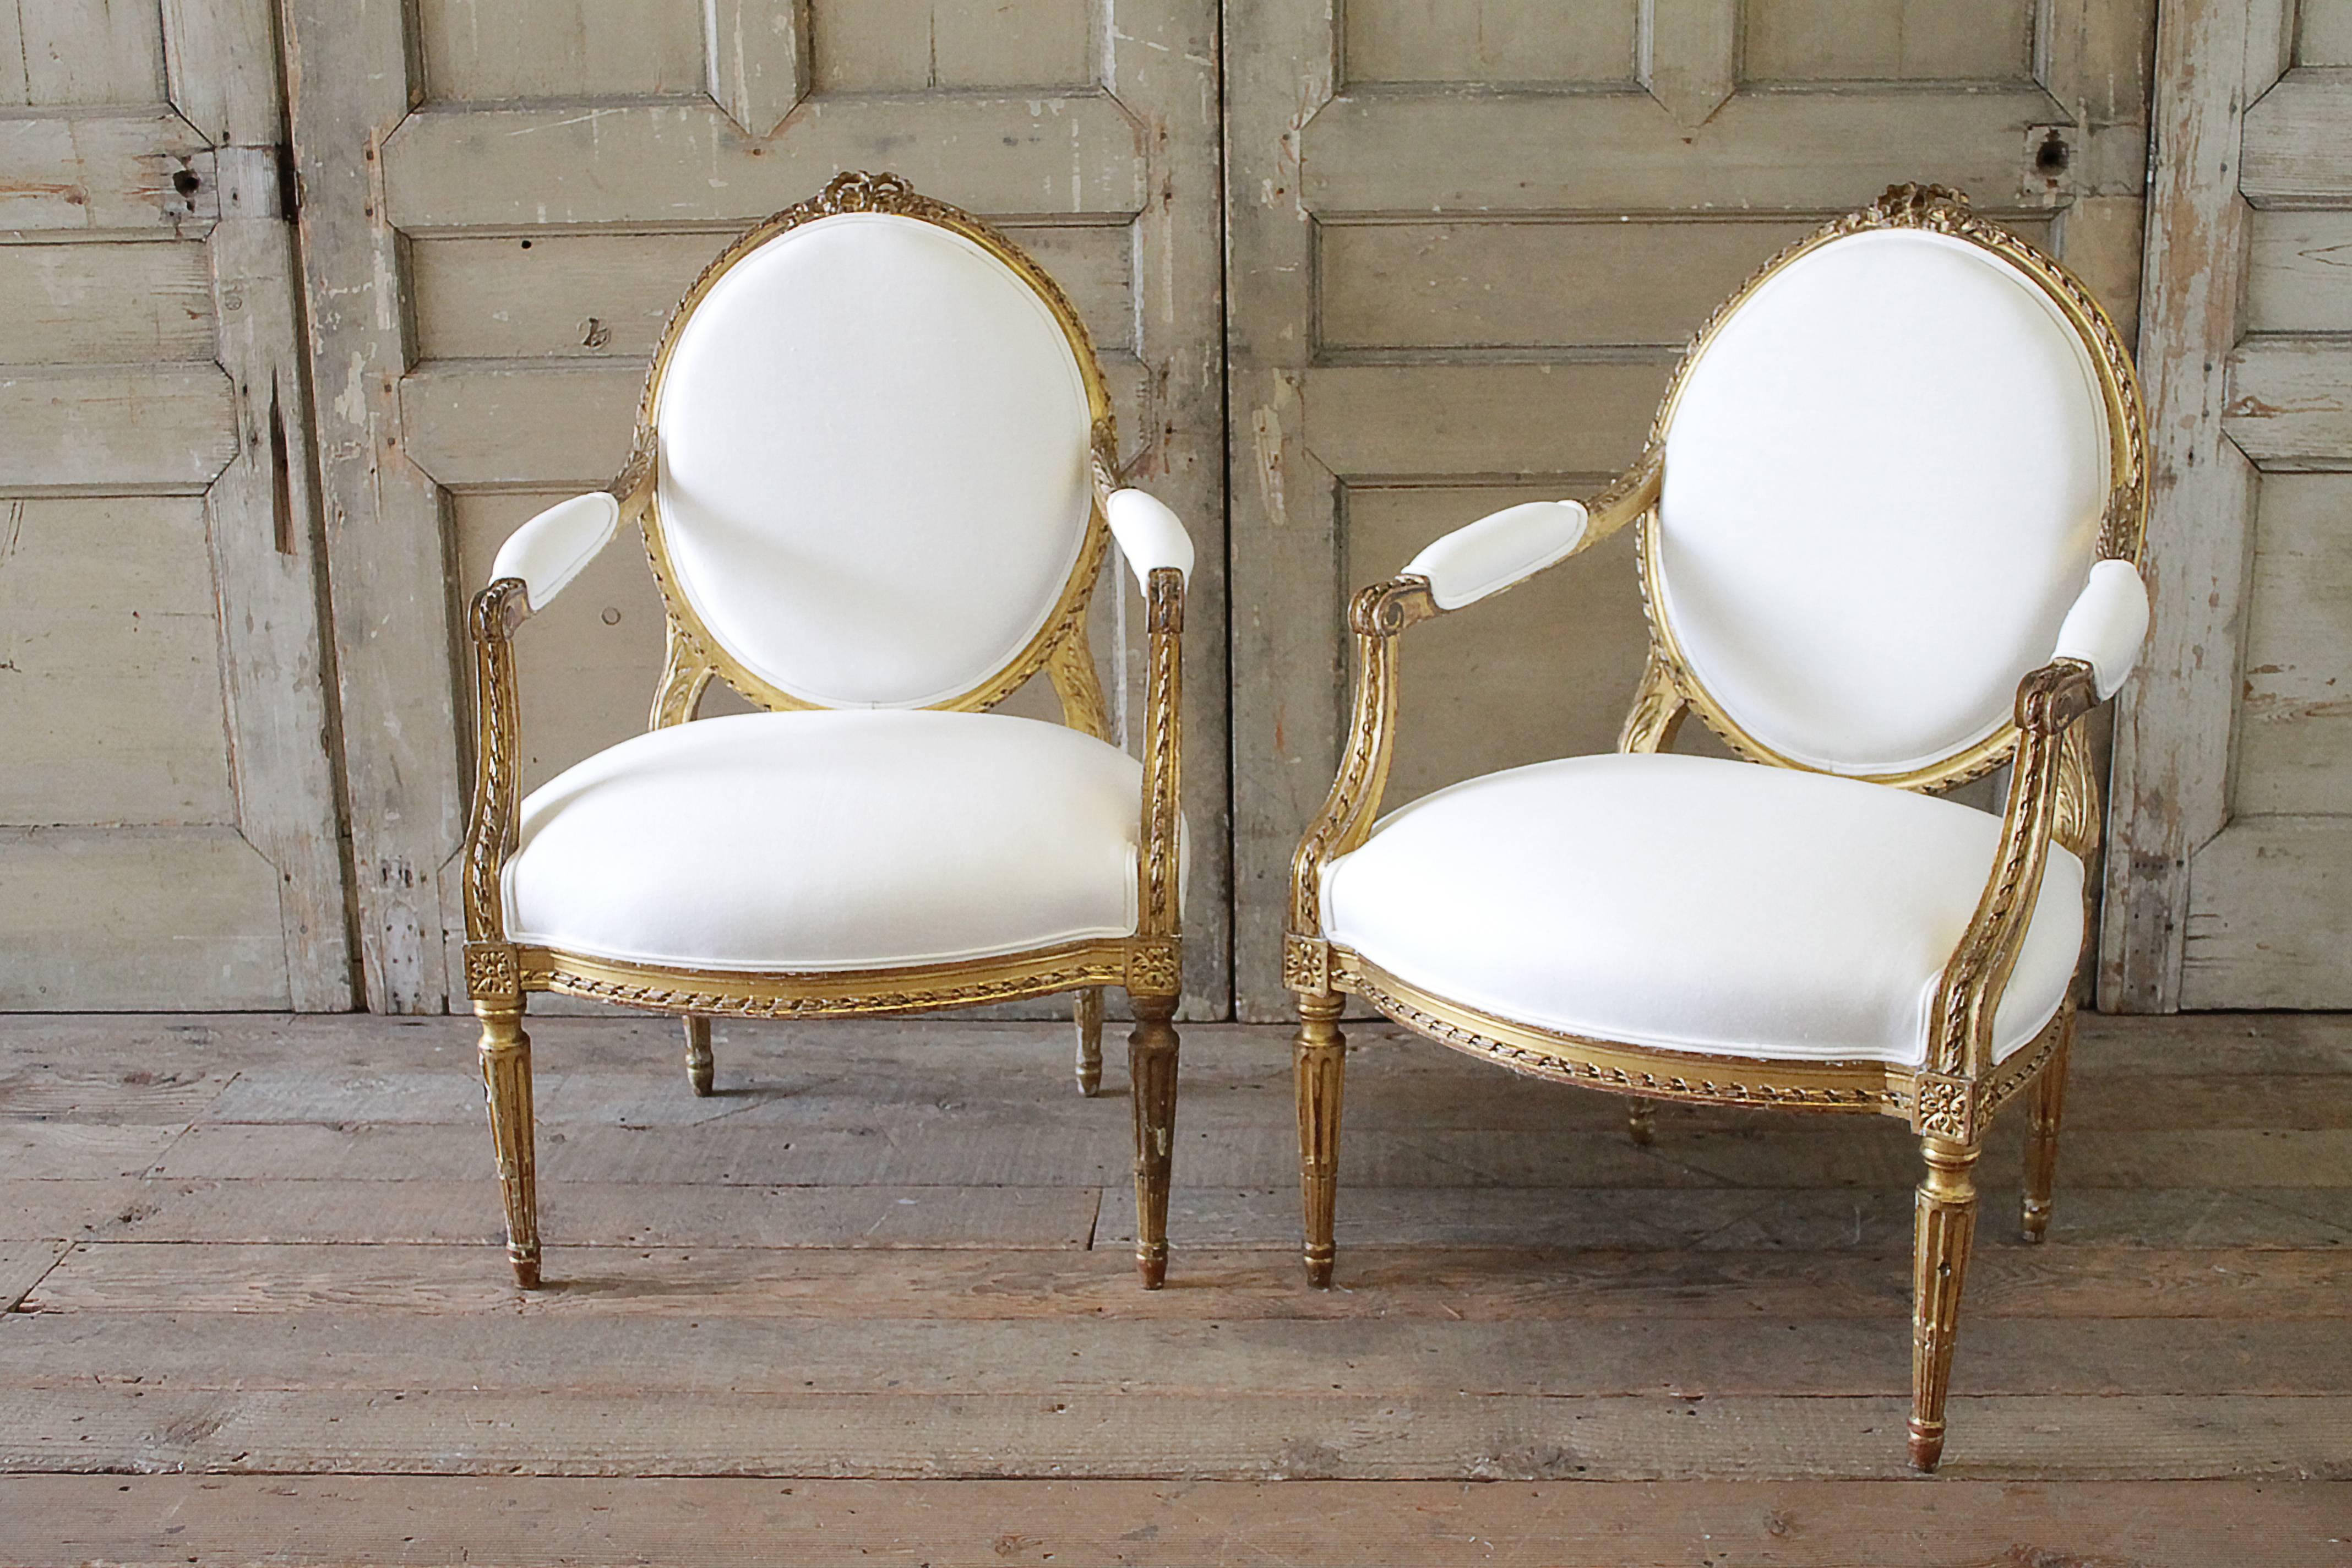 Beautiful larger size arm chairs with ribbon carved crest. Original finish has a wonderful aged patina, gilt has slight distressed edges. We have reupholstered this sofa in our 100% soft white Belgian linen. Linen has been prewashed and has a soft